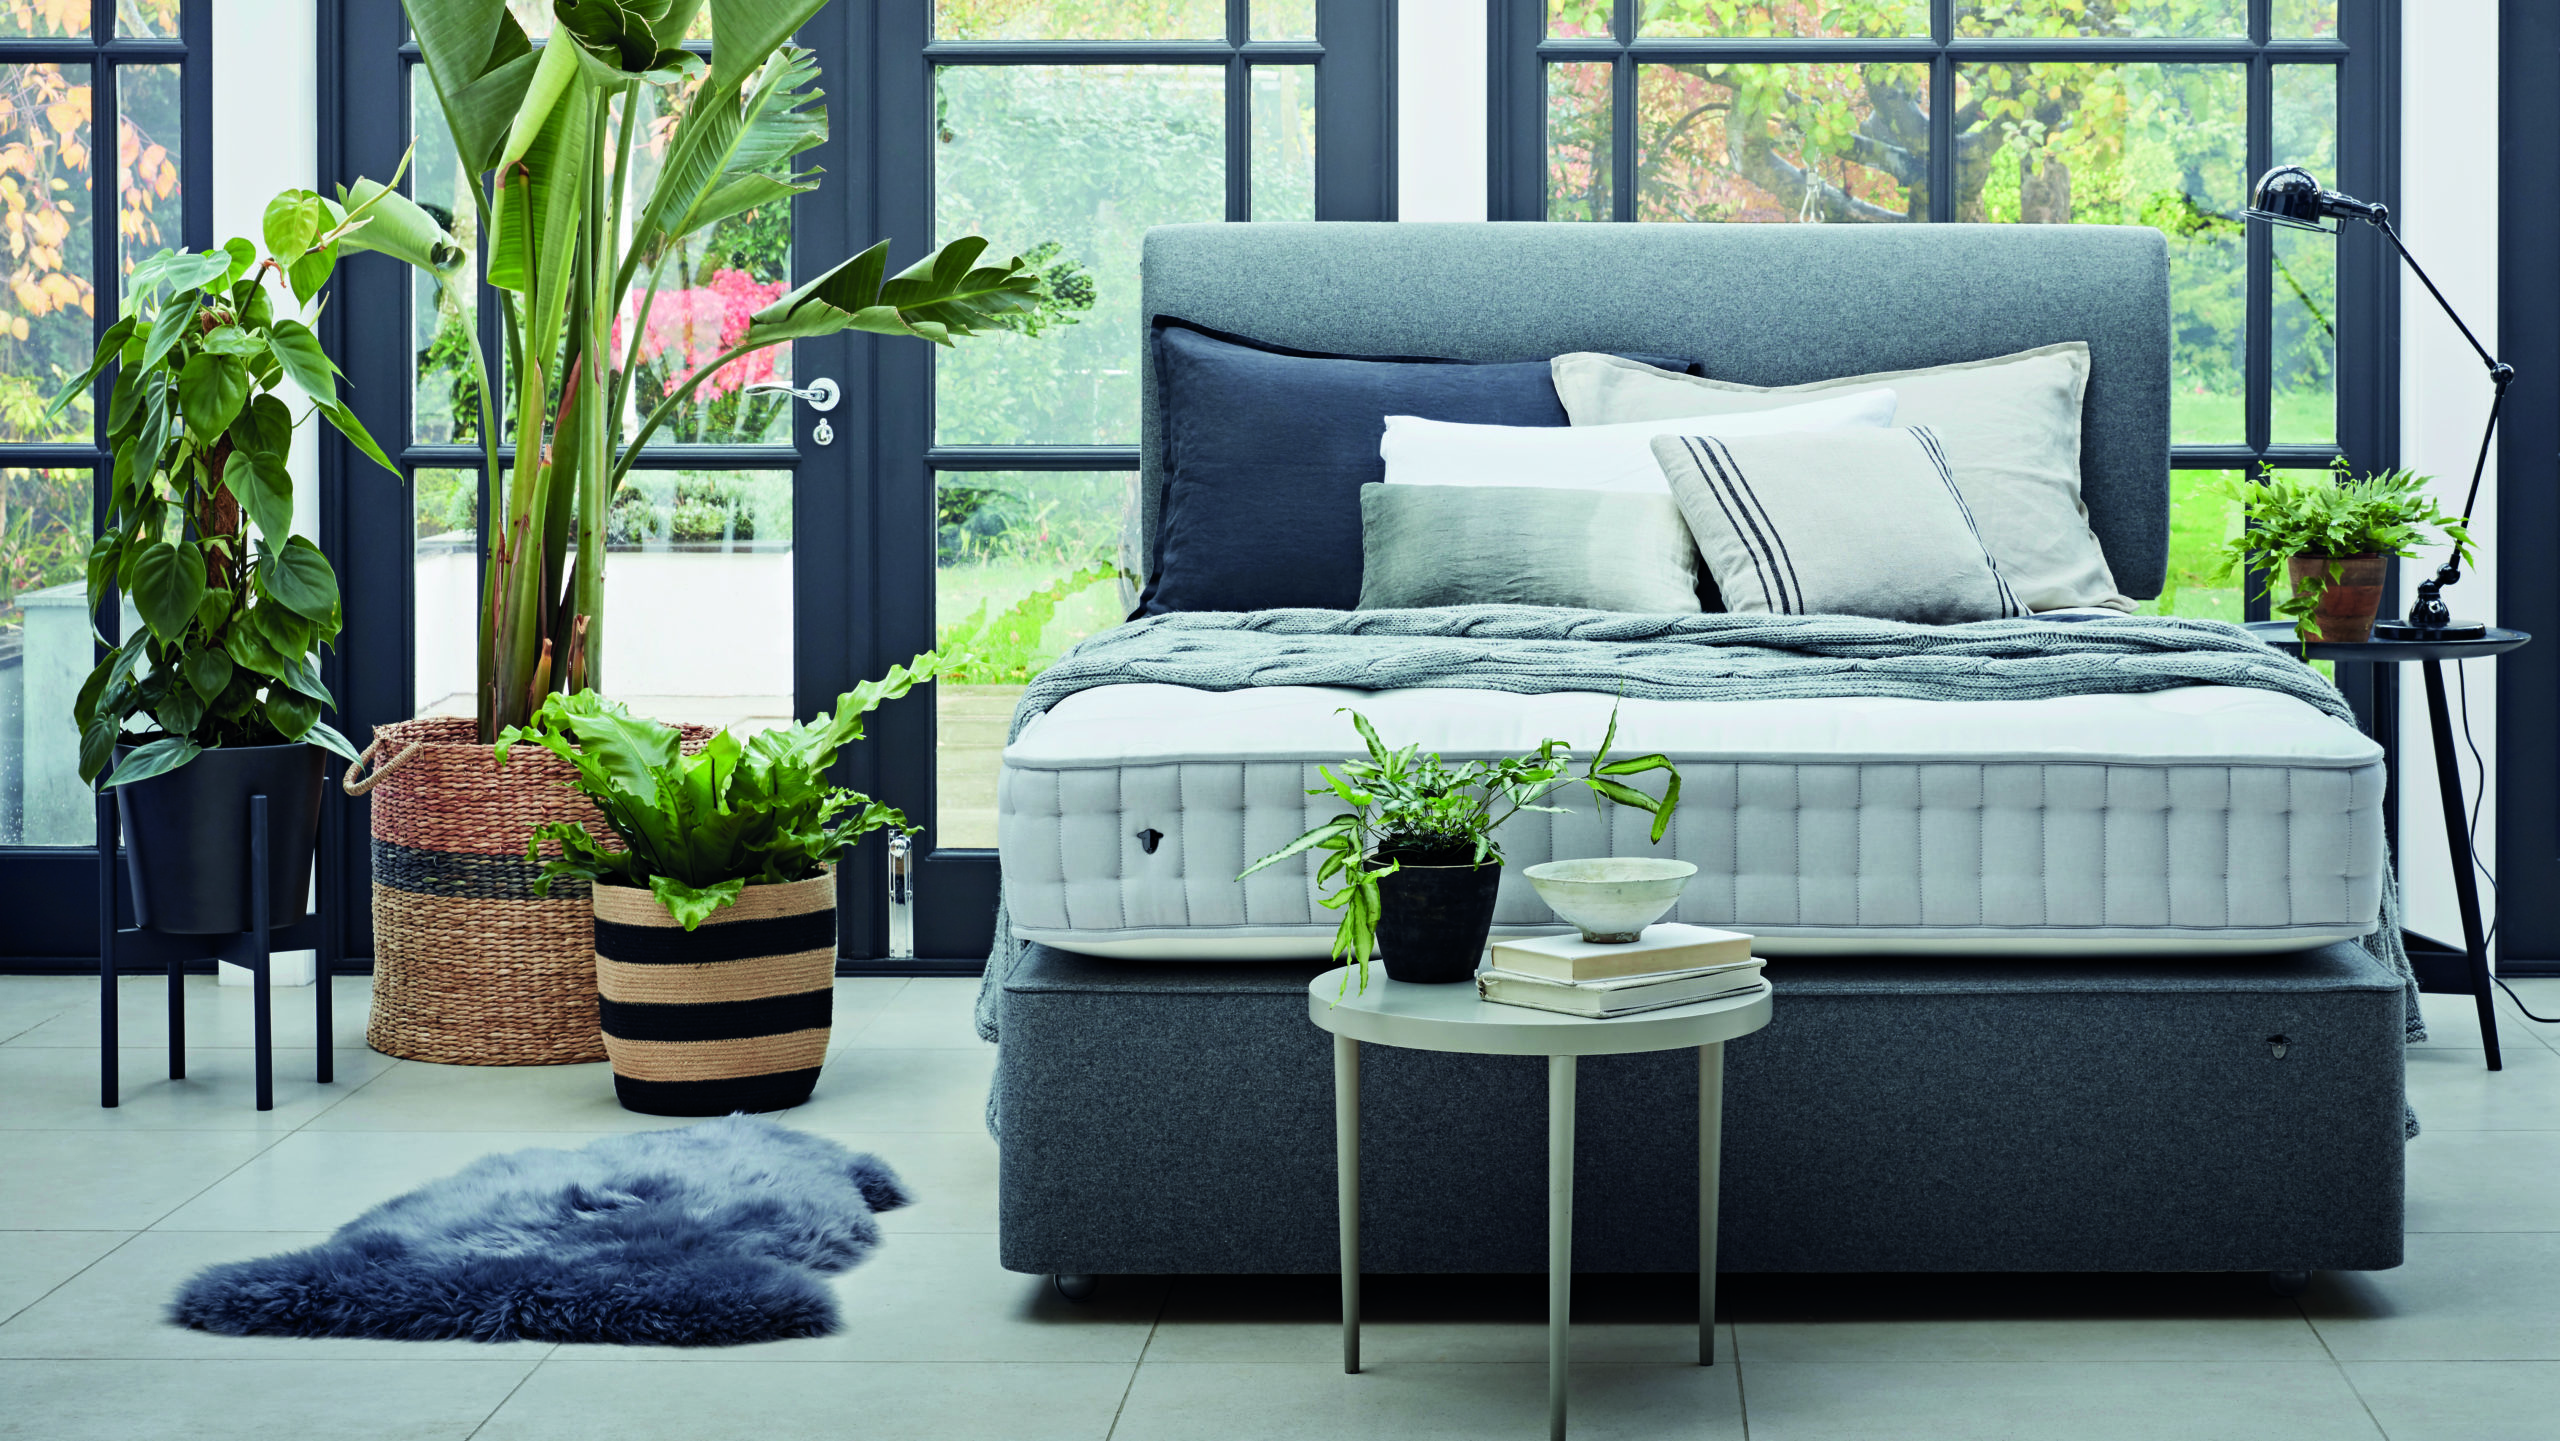 herdysleep-Conservatory-full-roomset-half-dressed-amended-cropped